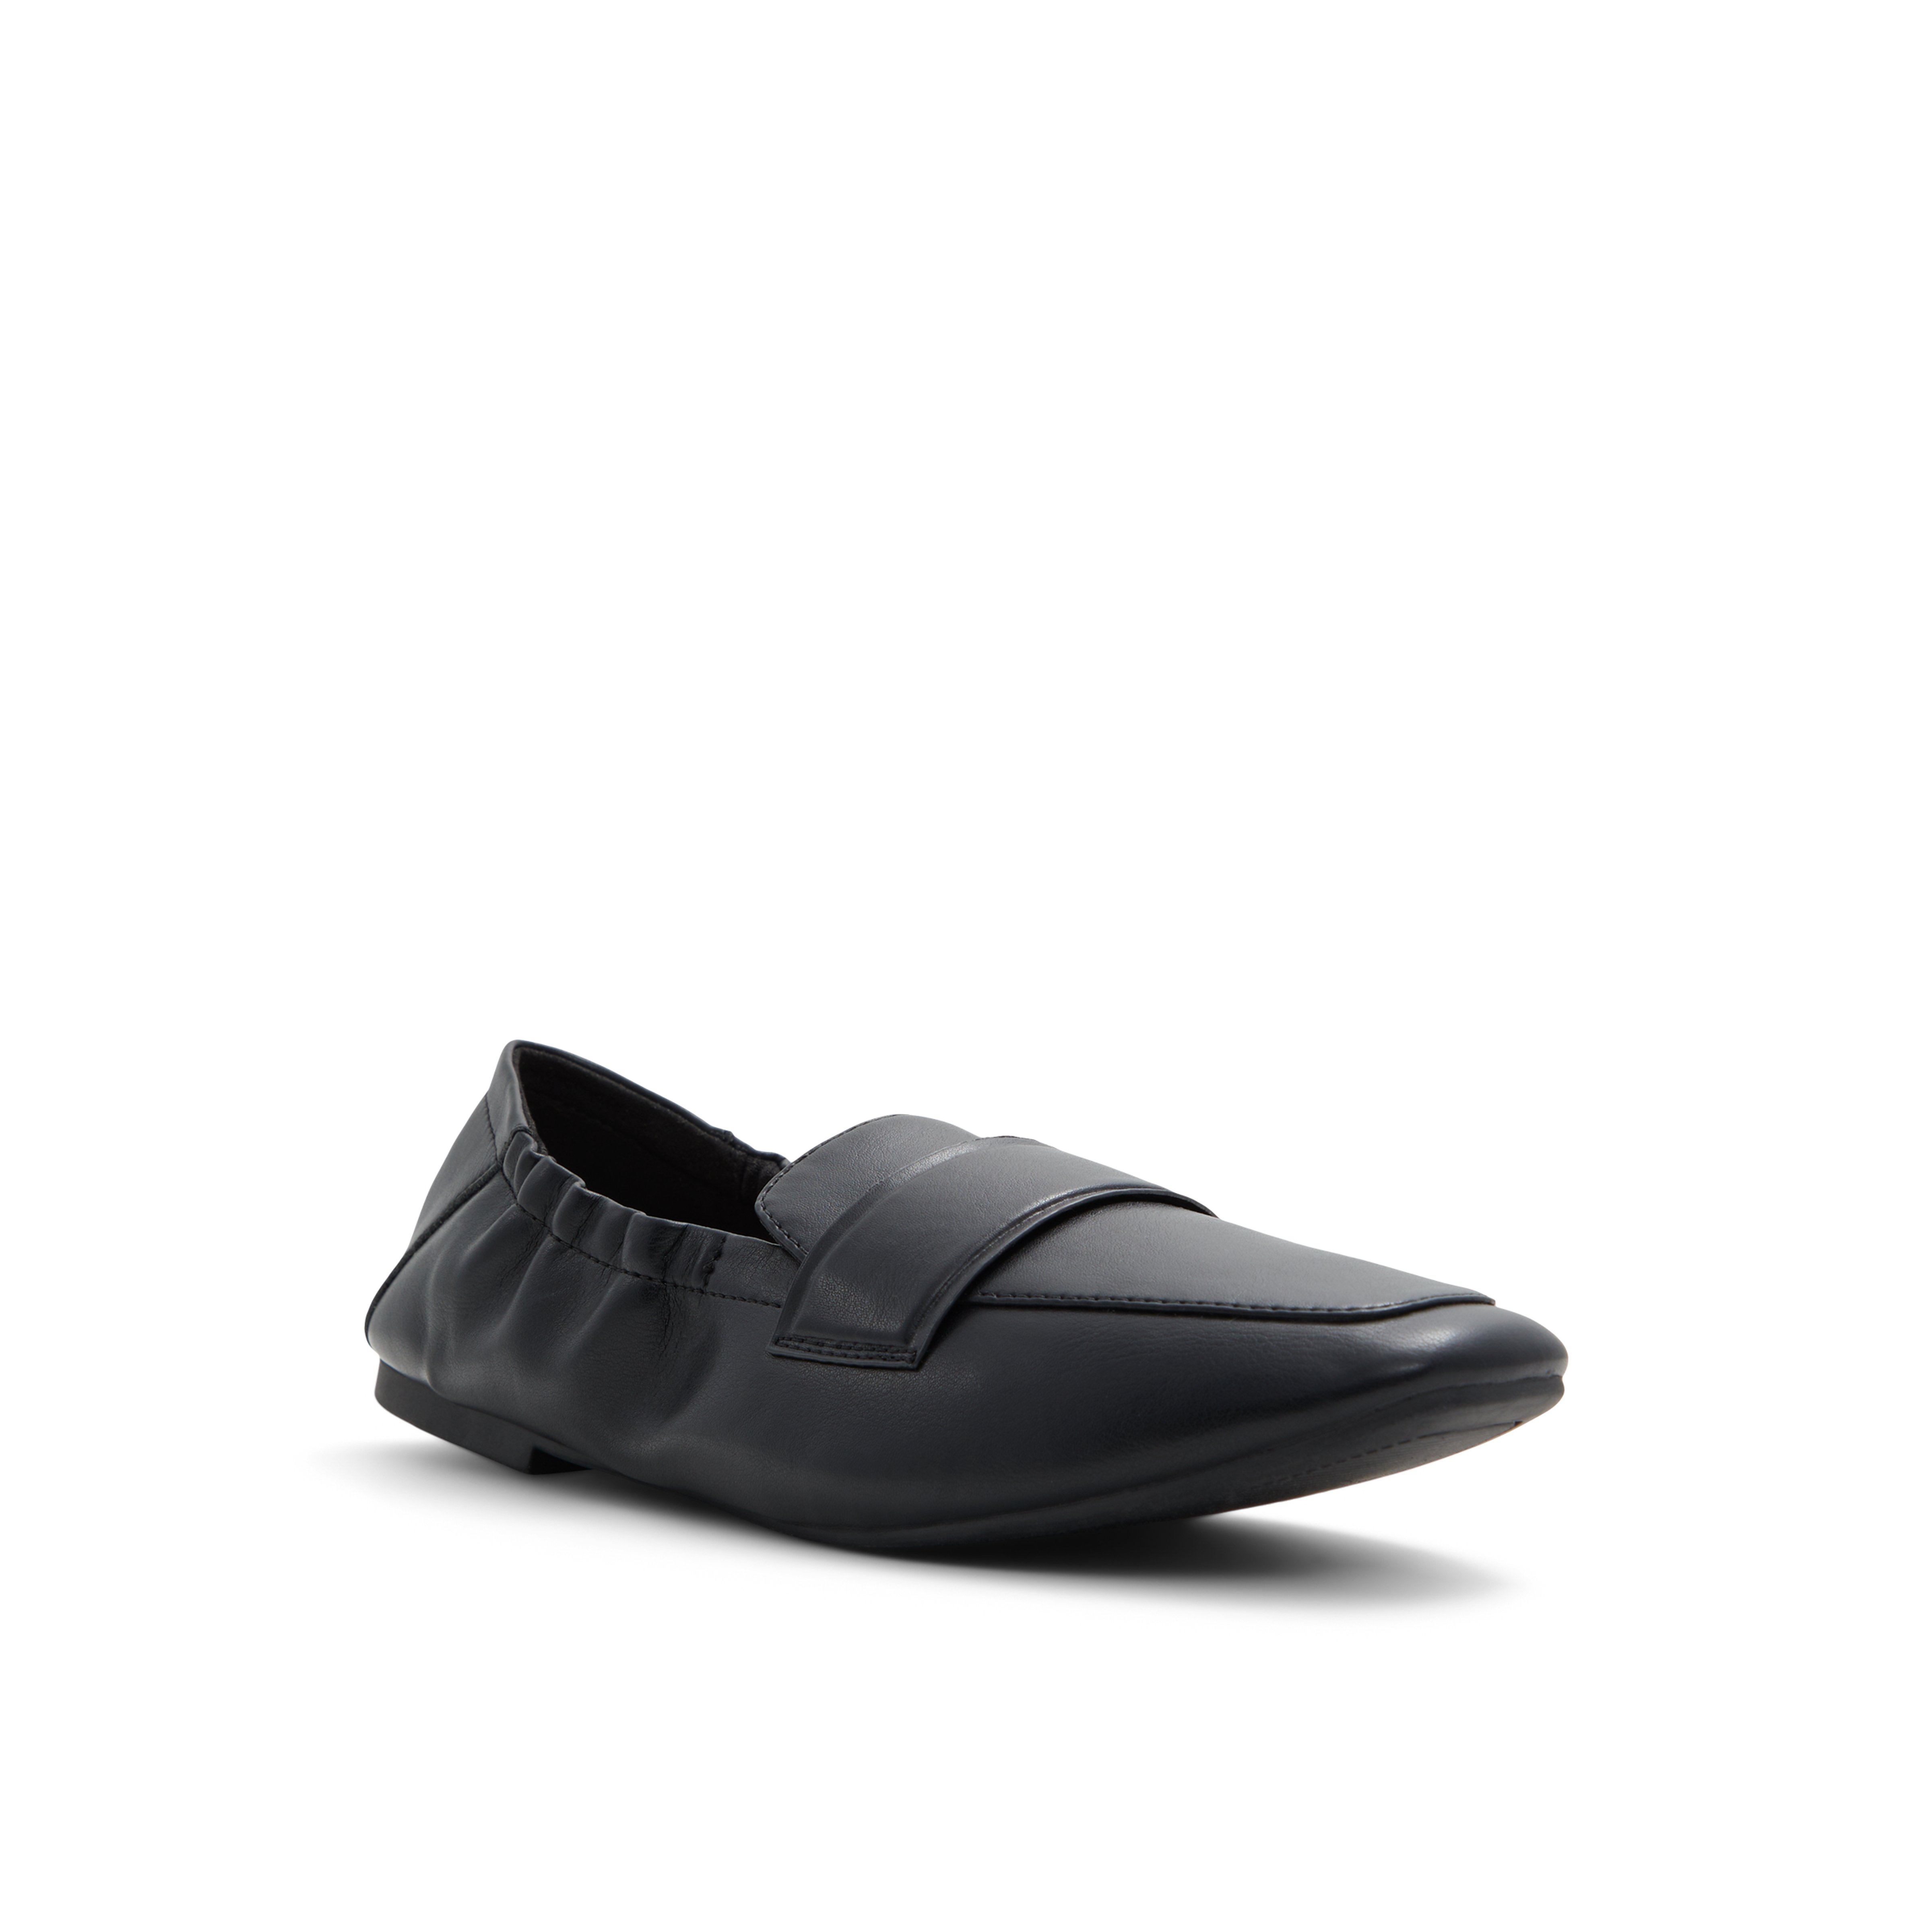 Tonii Penny loafers